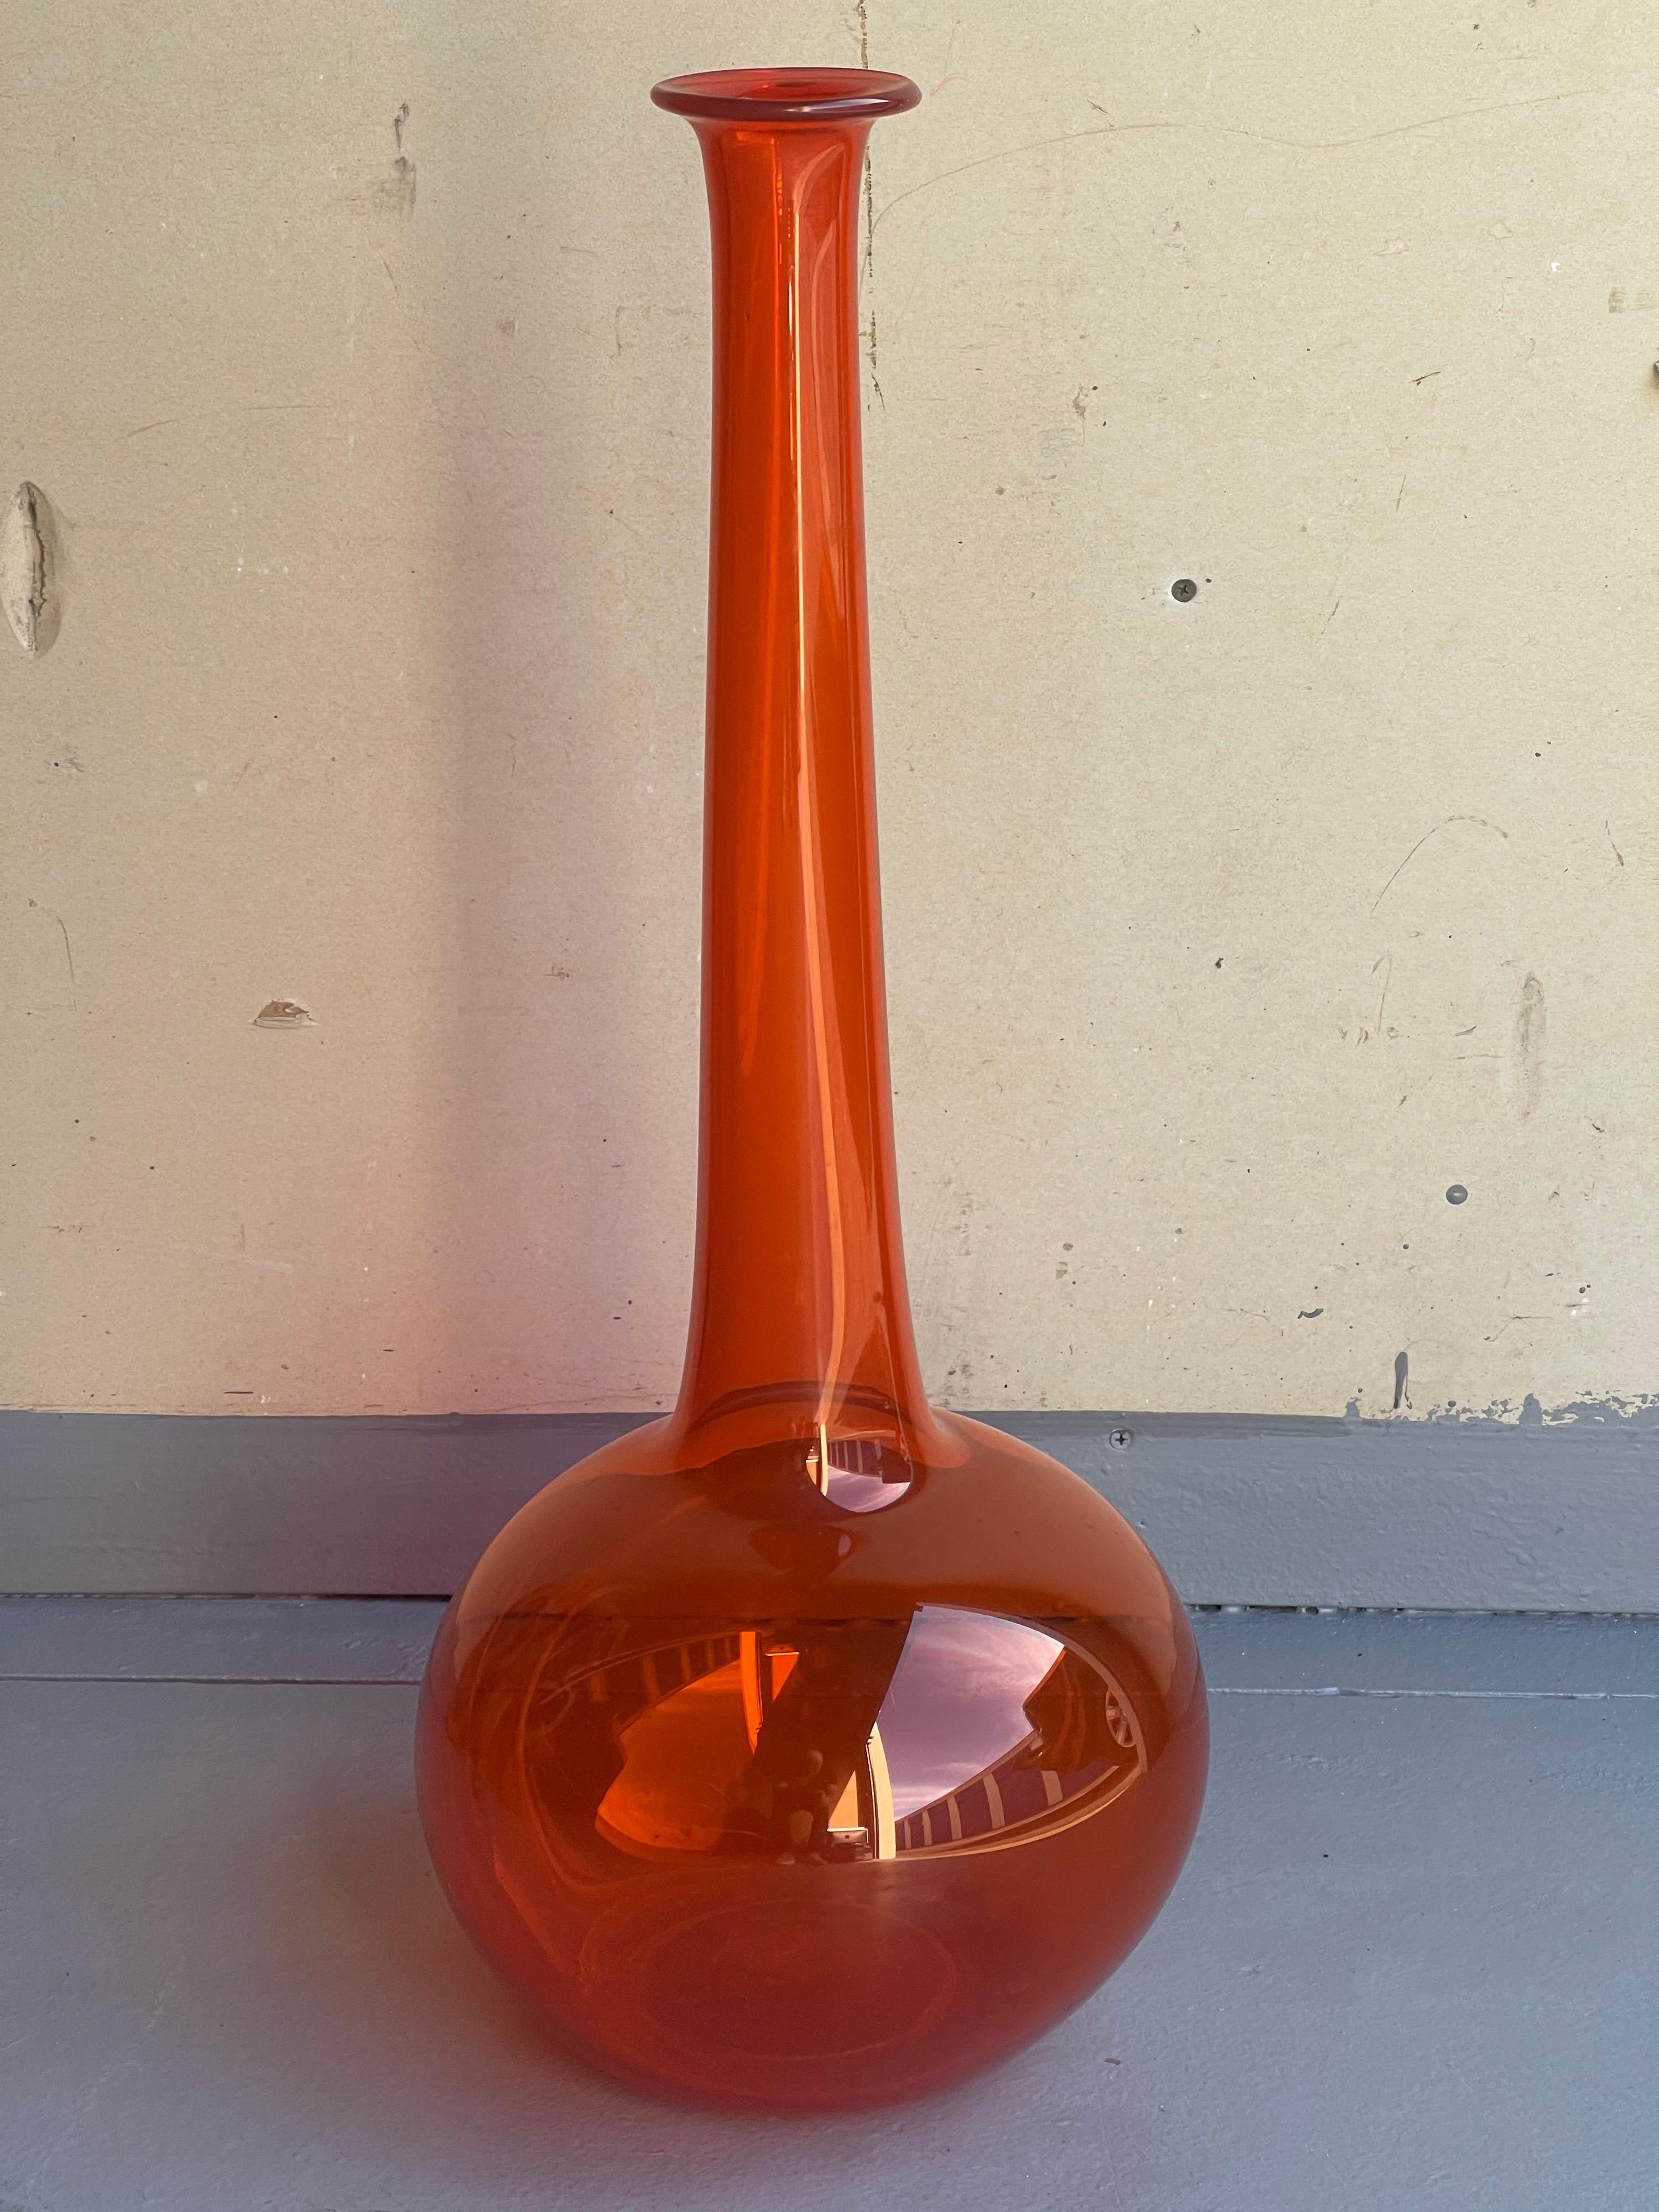 A very cool hand blown bright orange art glass vase in the style of Don Shepherd for Blenko Glass, circa 1980s. The piece is in very good vintage condition with no chips or cracks and measures 11